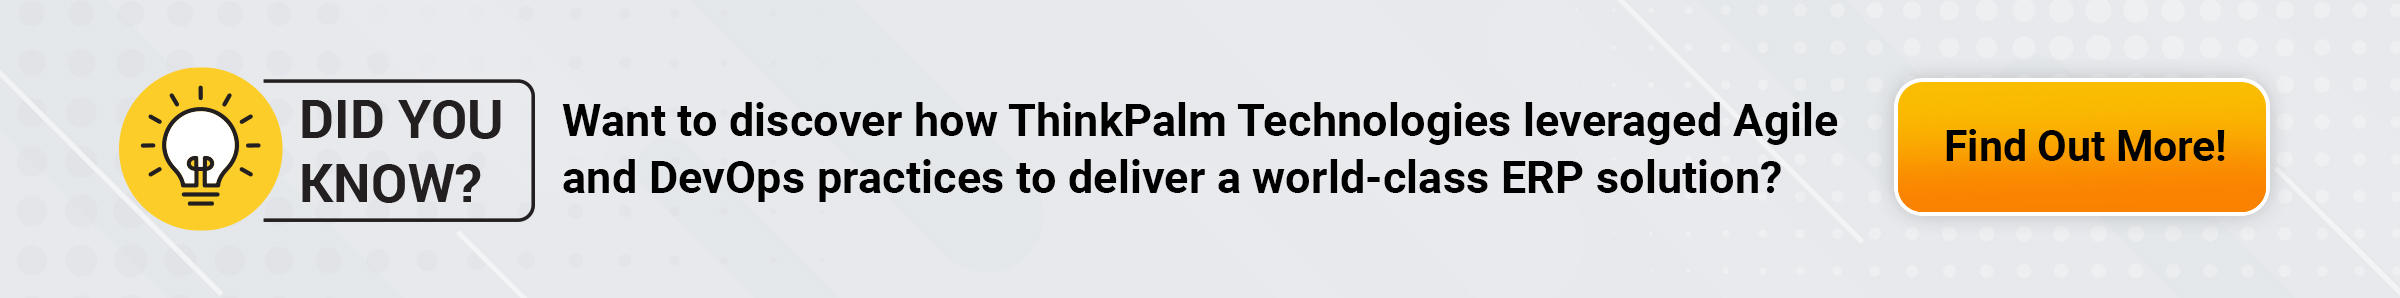 ThinkPalm leveraged DevoOps and agile practice to deliver a world-class ERP solution